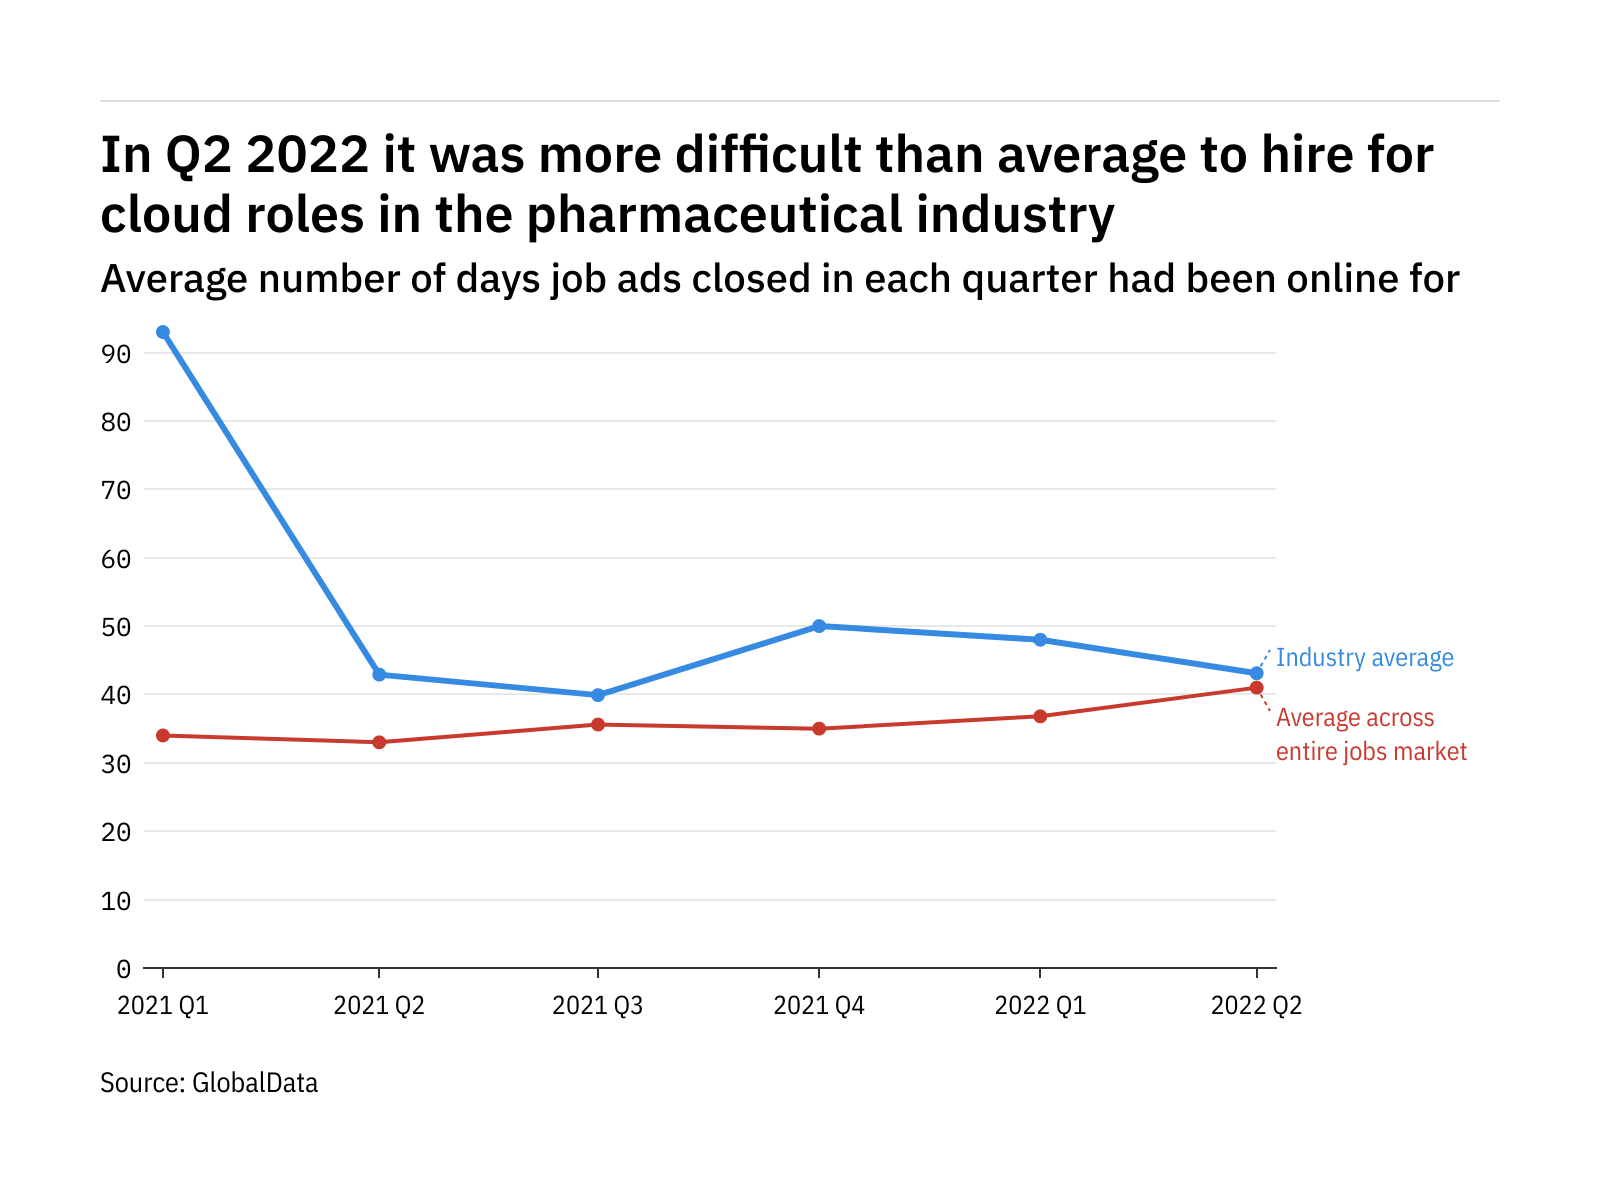 Pharma found it easier to fill cloud vacancies in Q2 2022